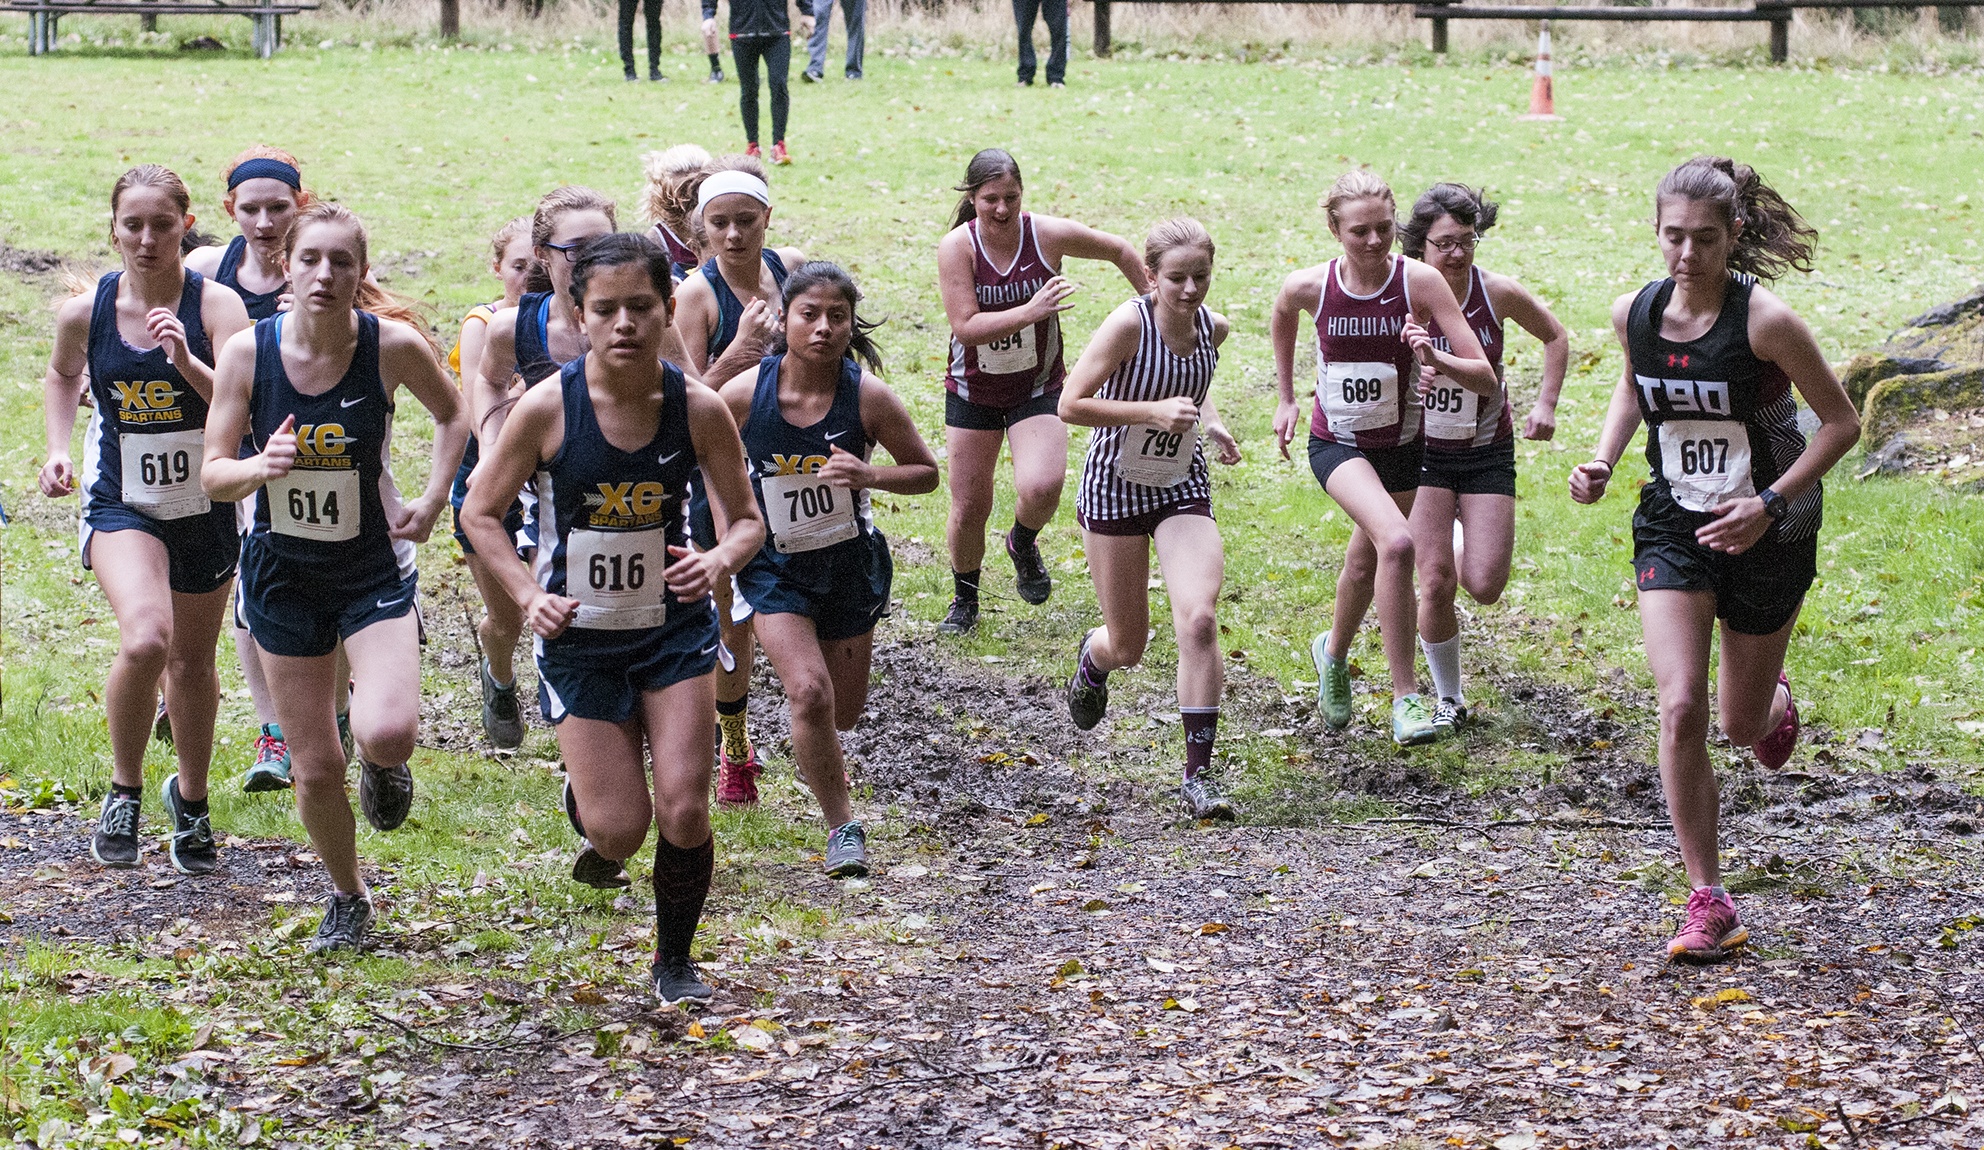 Monte’s Mustard rallies to win league cross country title